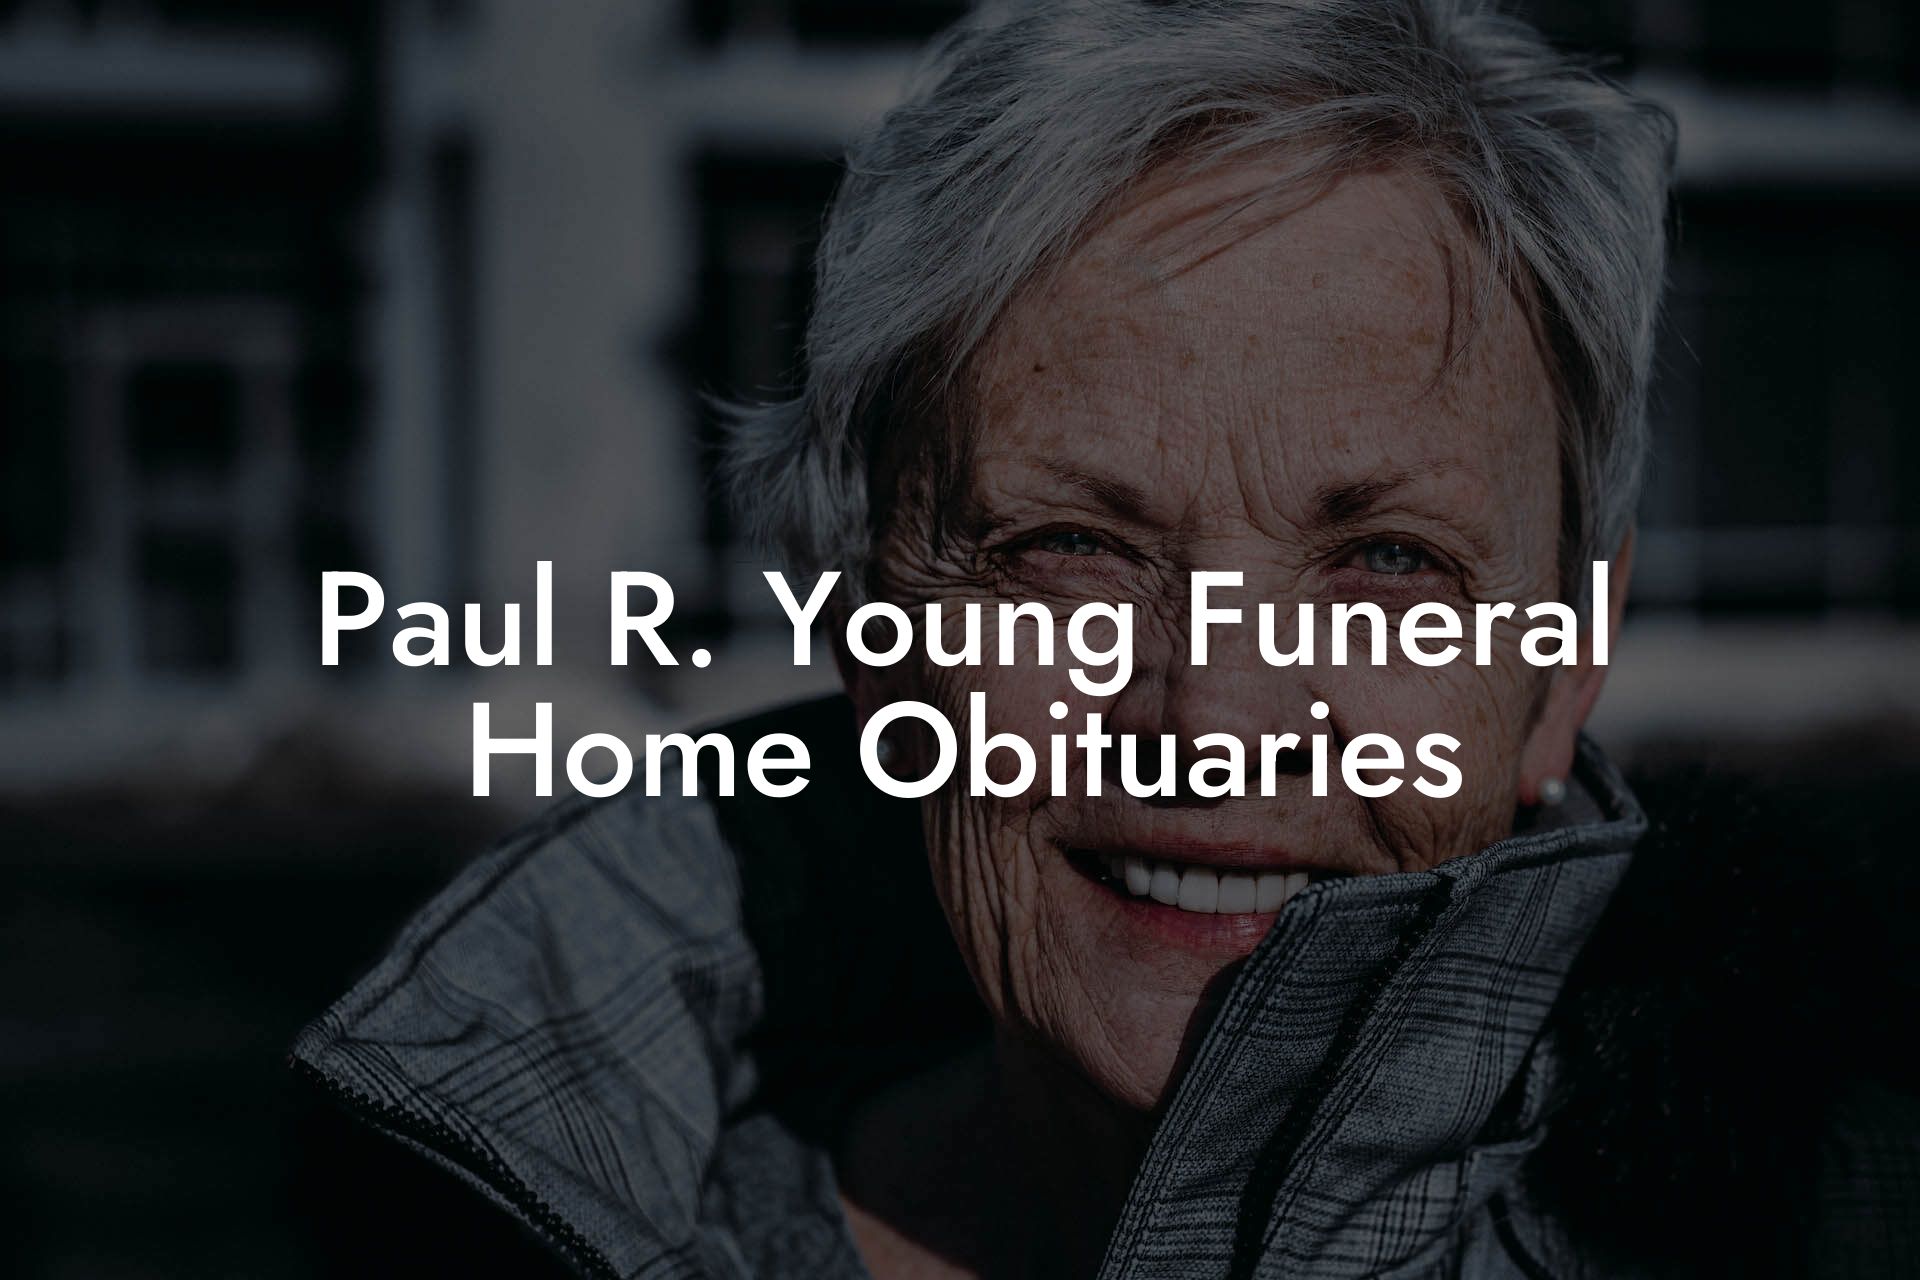 Paul R. Young Funeral Home Obituaries